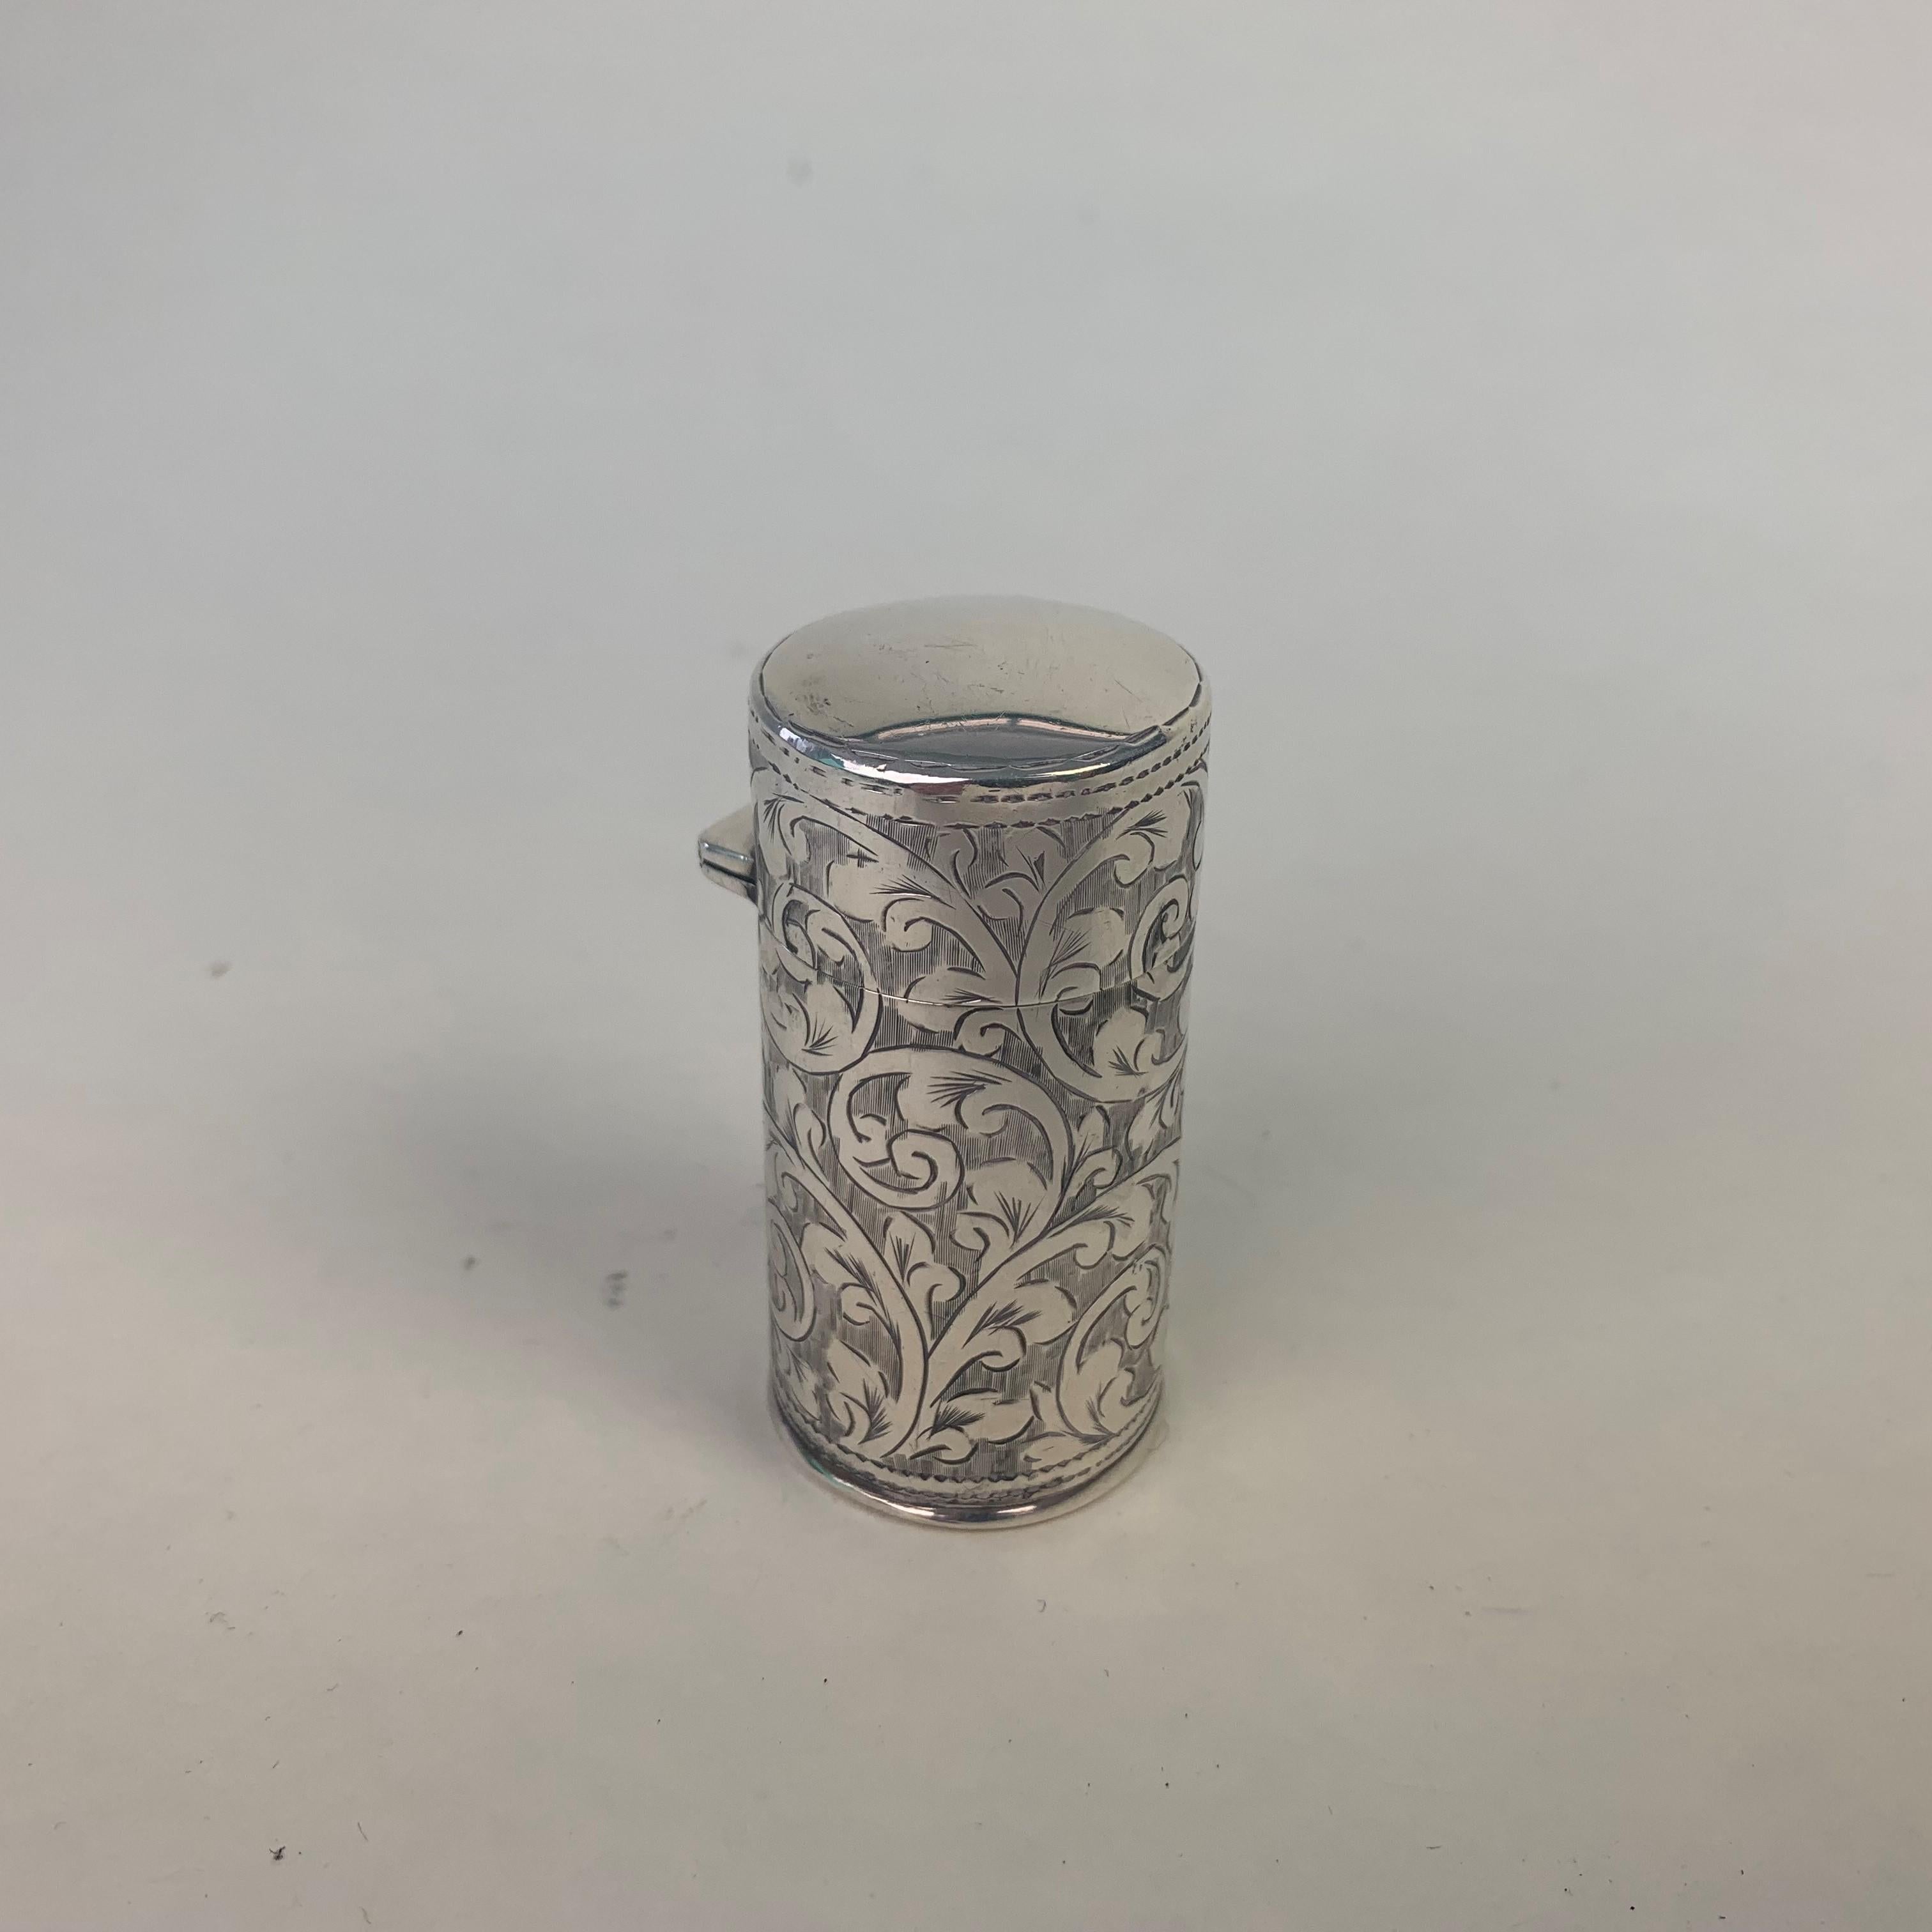 A fine quality silver cased scent bottle engraved with scrolling leafy decoration. The snap-shut hinged lid enclosing the original glass stopper which fits inside the fixed glass lining.
Hallmarked Birmingham 1905 by Benjamin Thomas Greening.